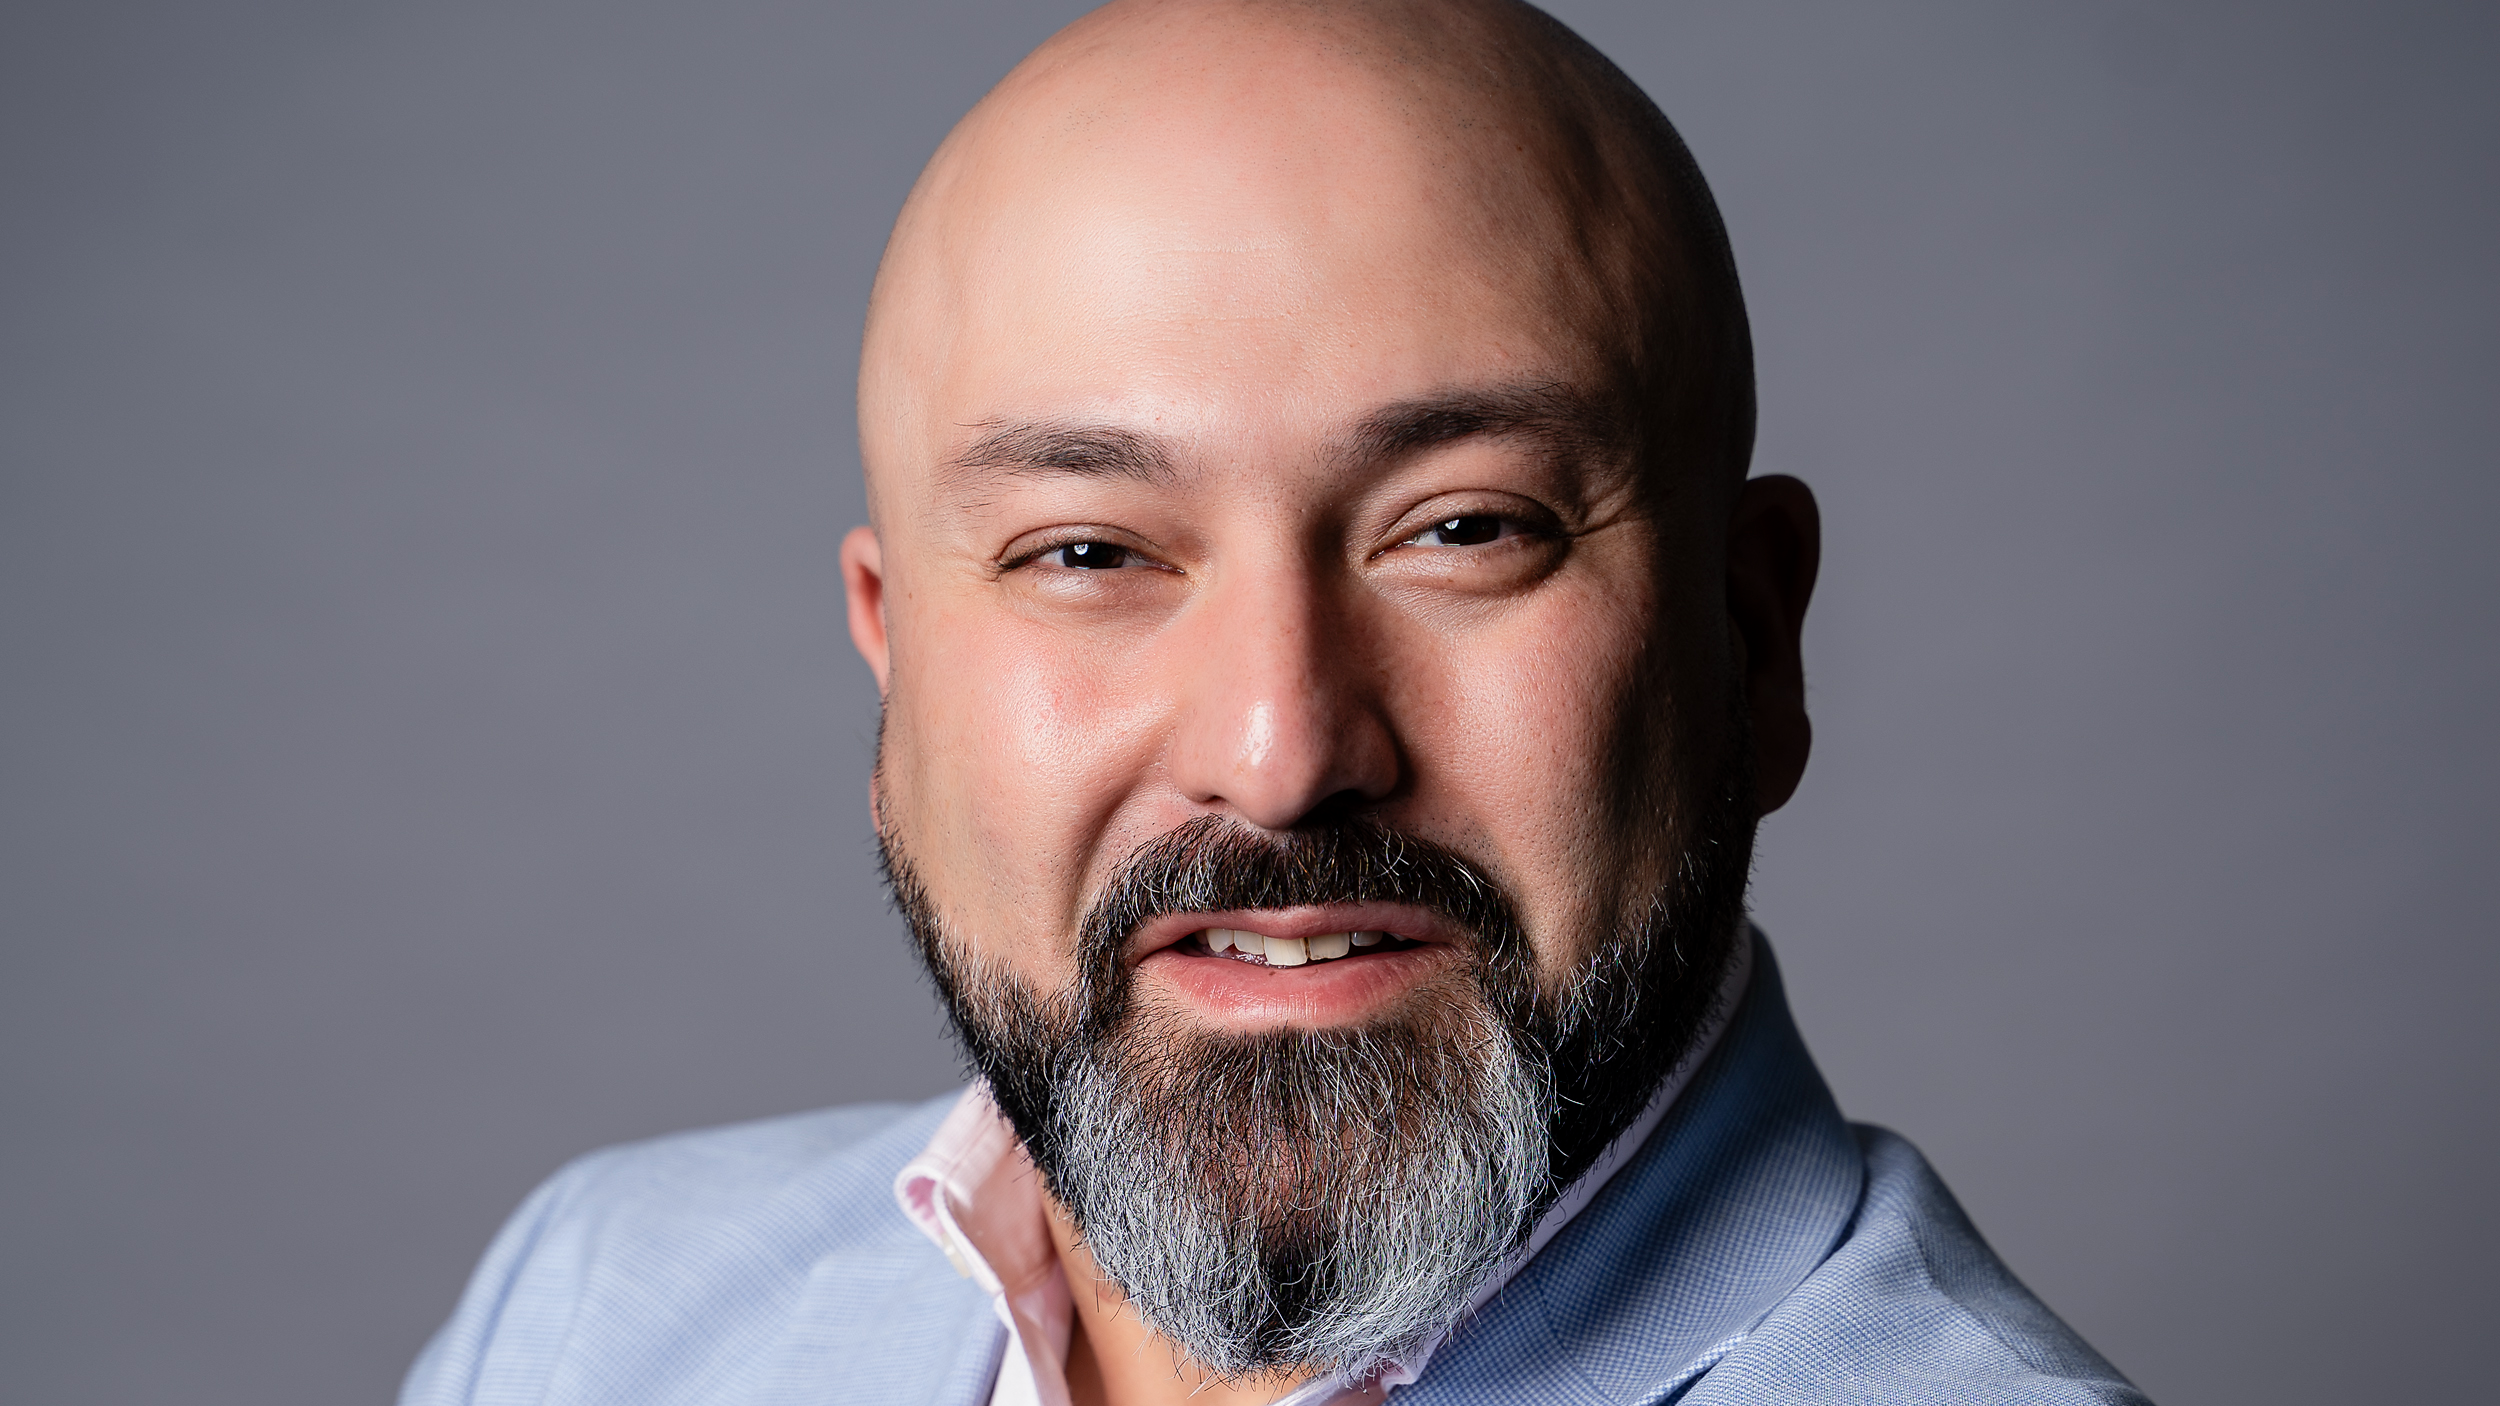 https://adgully.me/post/5426/merkle-mena-appoints-sameer-poonja-as-first-head-of-experience-and-platforms